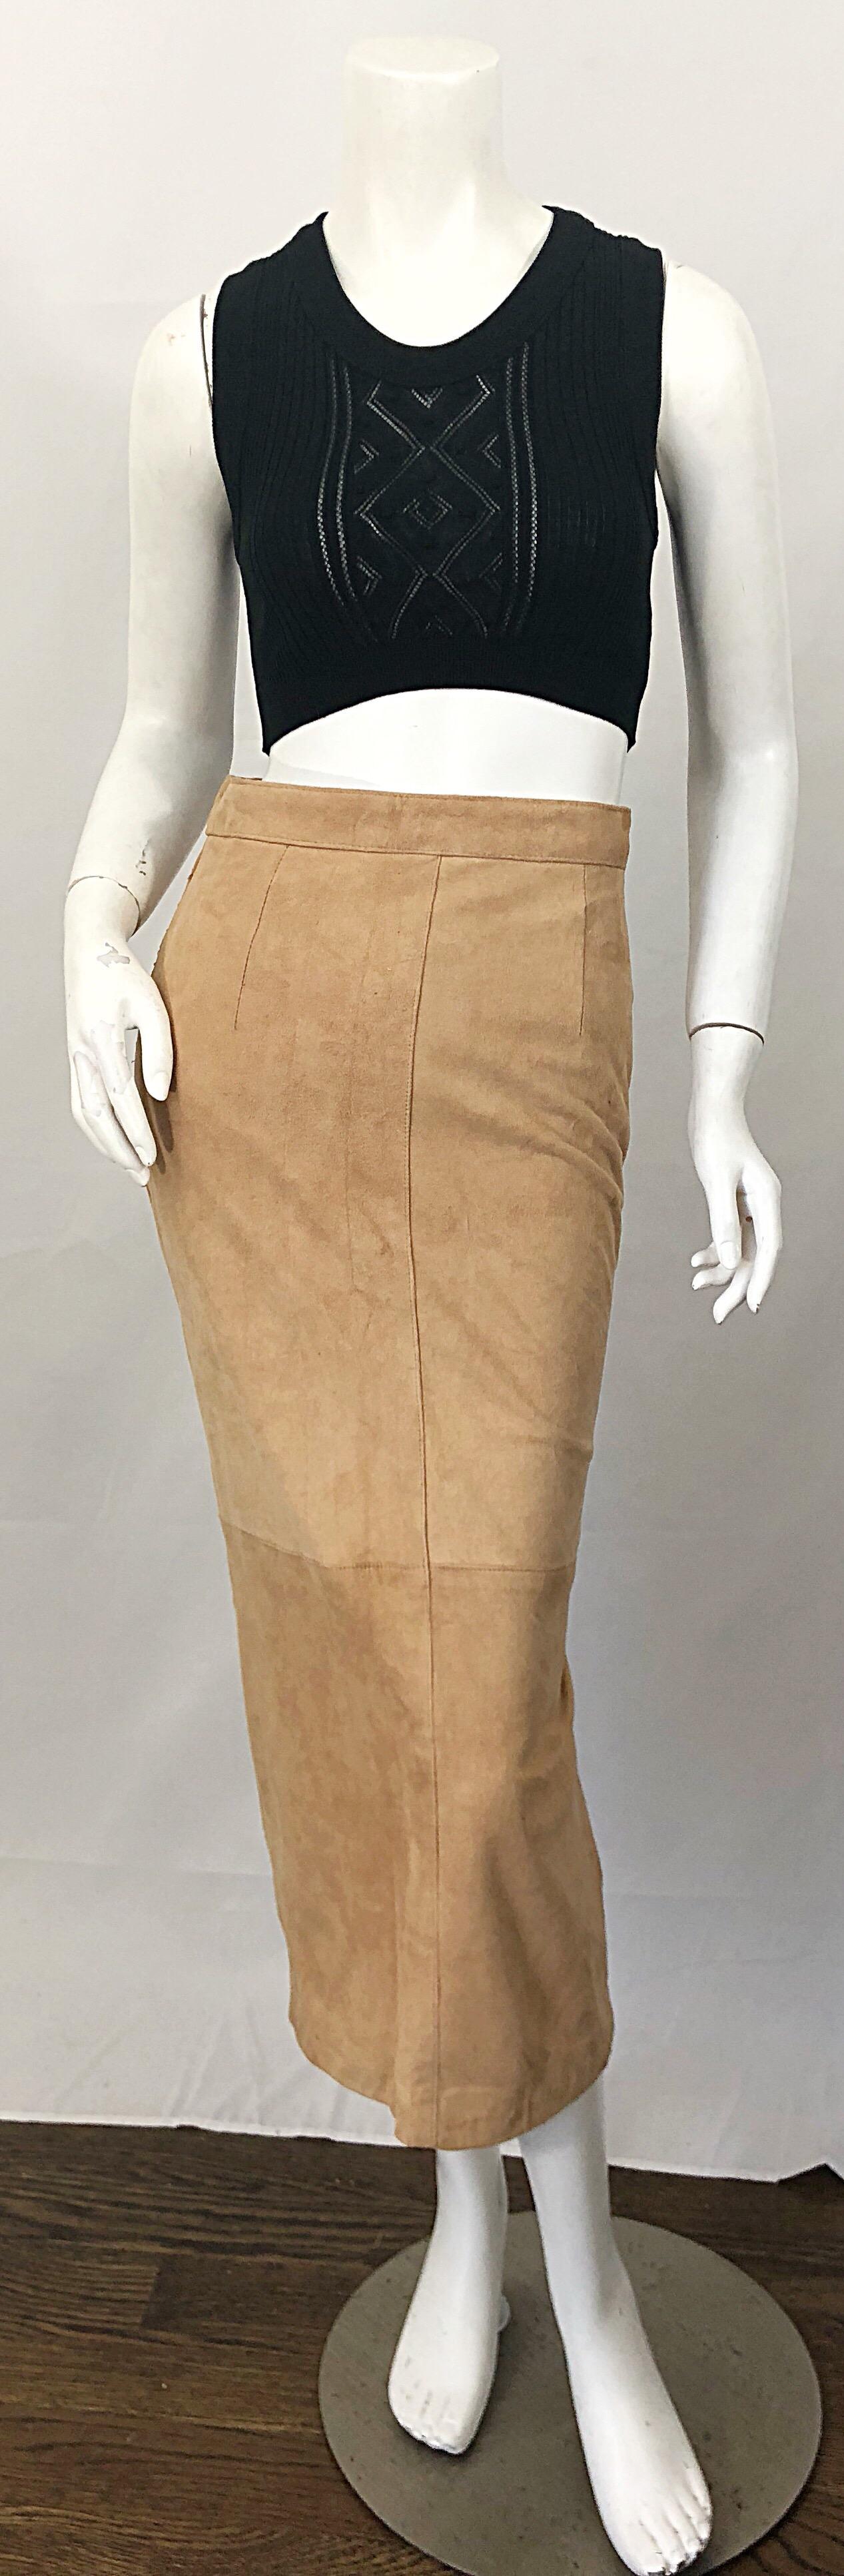 Chic early 90s CALVIN KLEIN high waisted vintage tan suede leather midi pencil skirt! Flattering high waist with a sleek tailored fit. Fully lined. Hidden zipper up the back with button closure. Can easily be dressed up or down. The pictured vintage